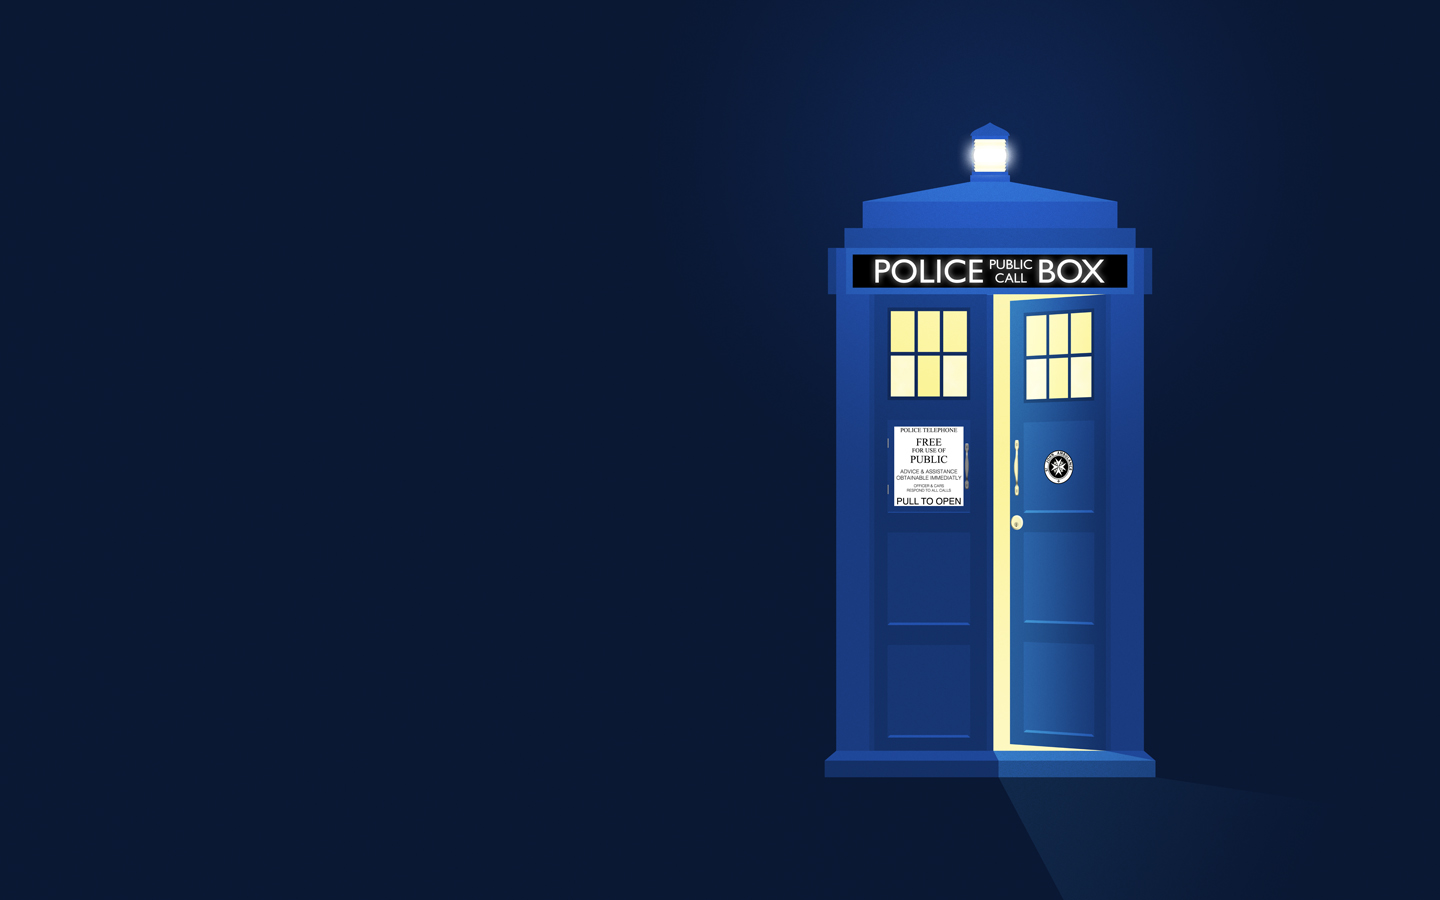 Doctor who wallpapers HD A15 - Dr Who Wallpapers | Doctor who backgrounds | doctor who tardis wallpapers | Doctor who desktop wallpapers | doctor who phone wallpapers.